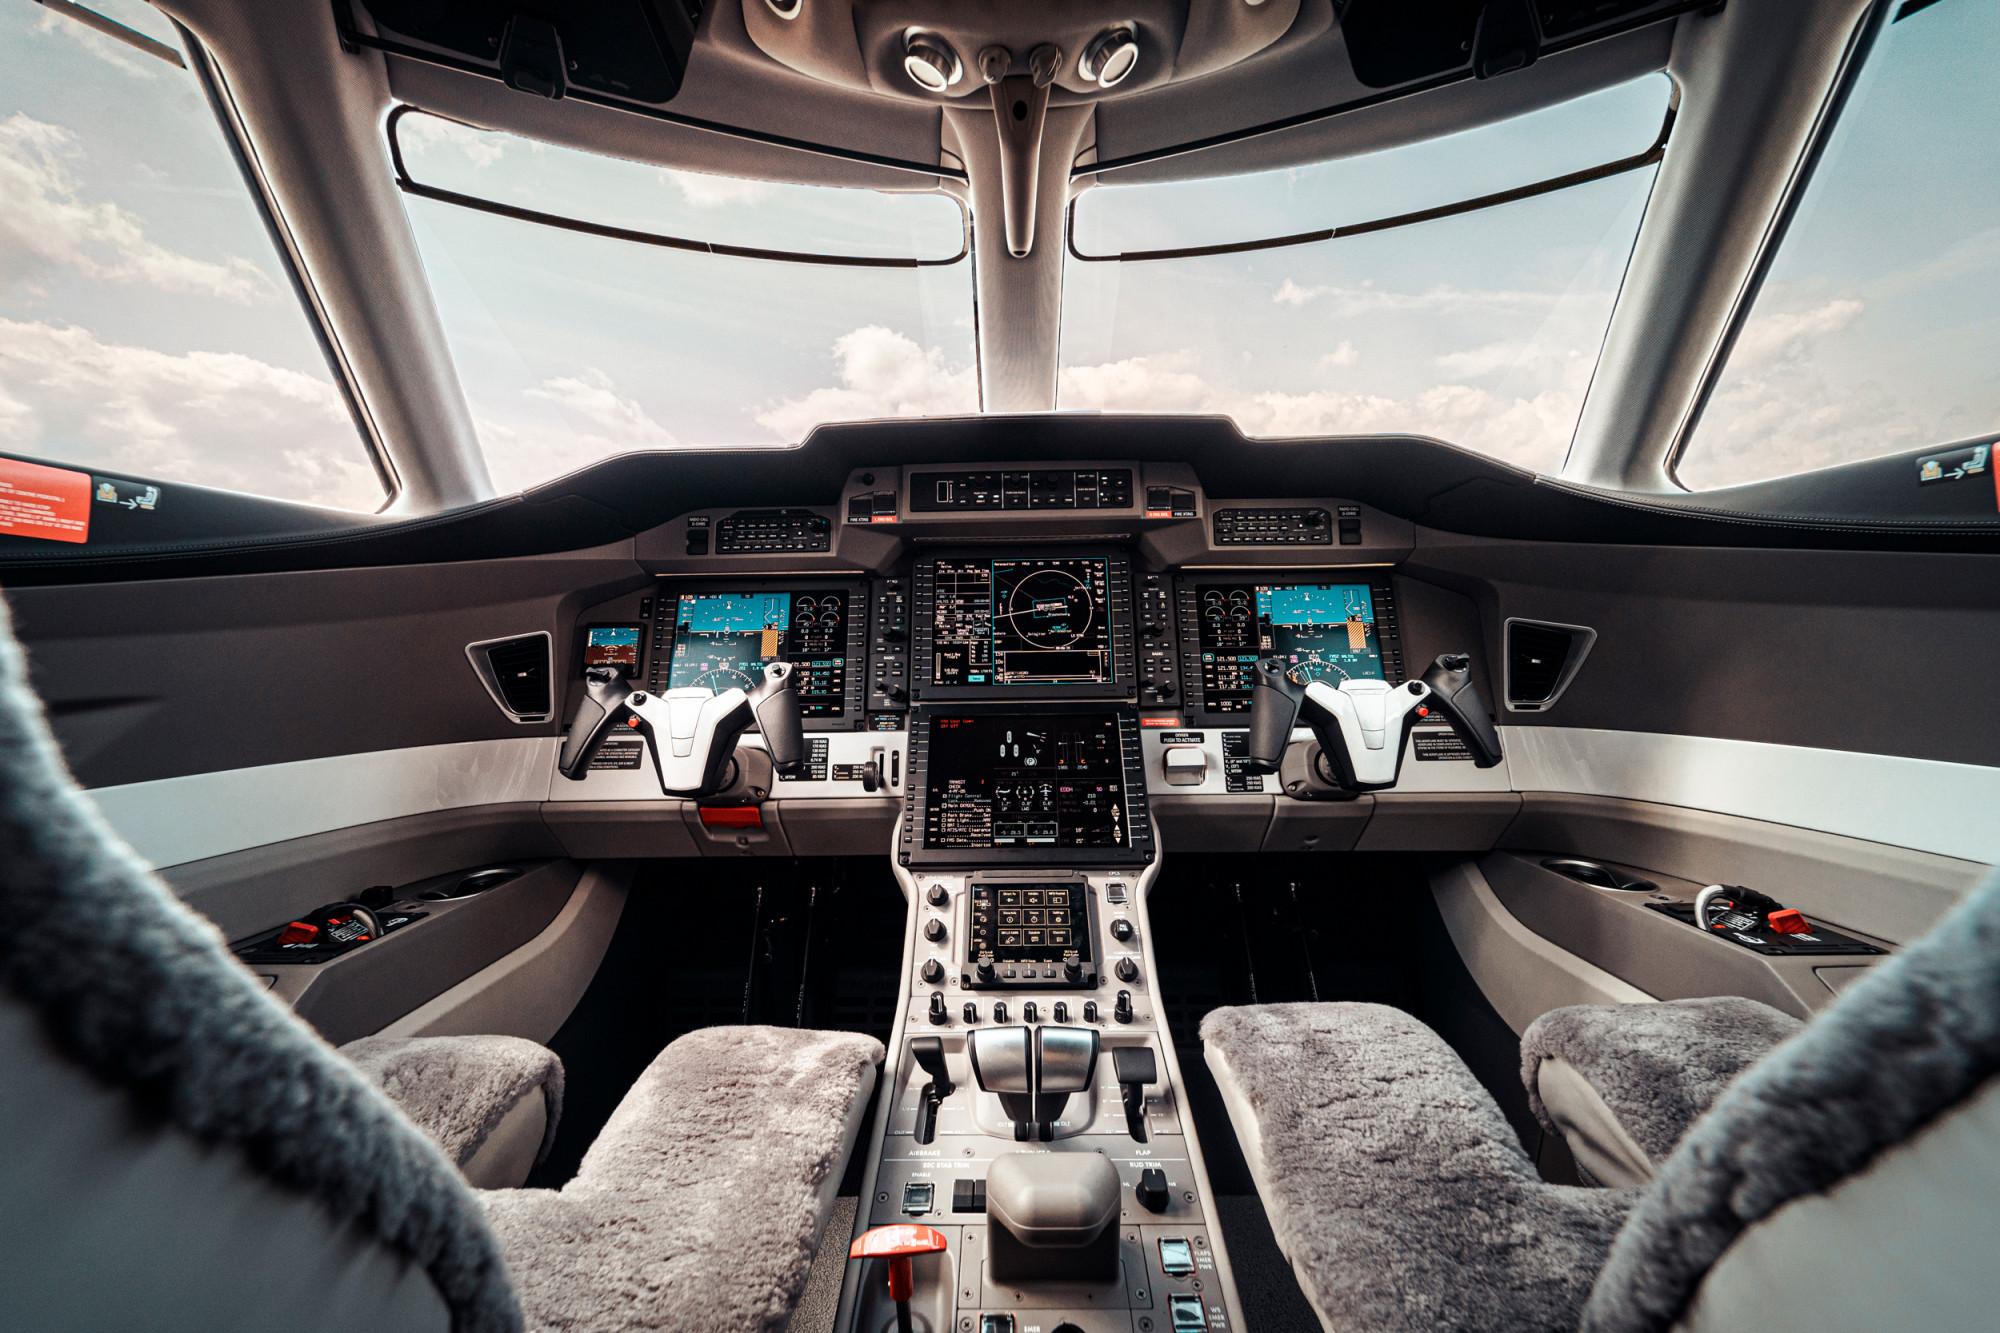 PC-24 jet cockpit from aisleway